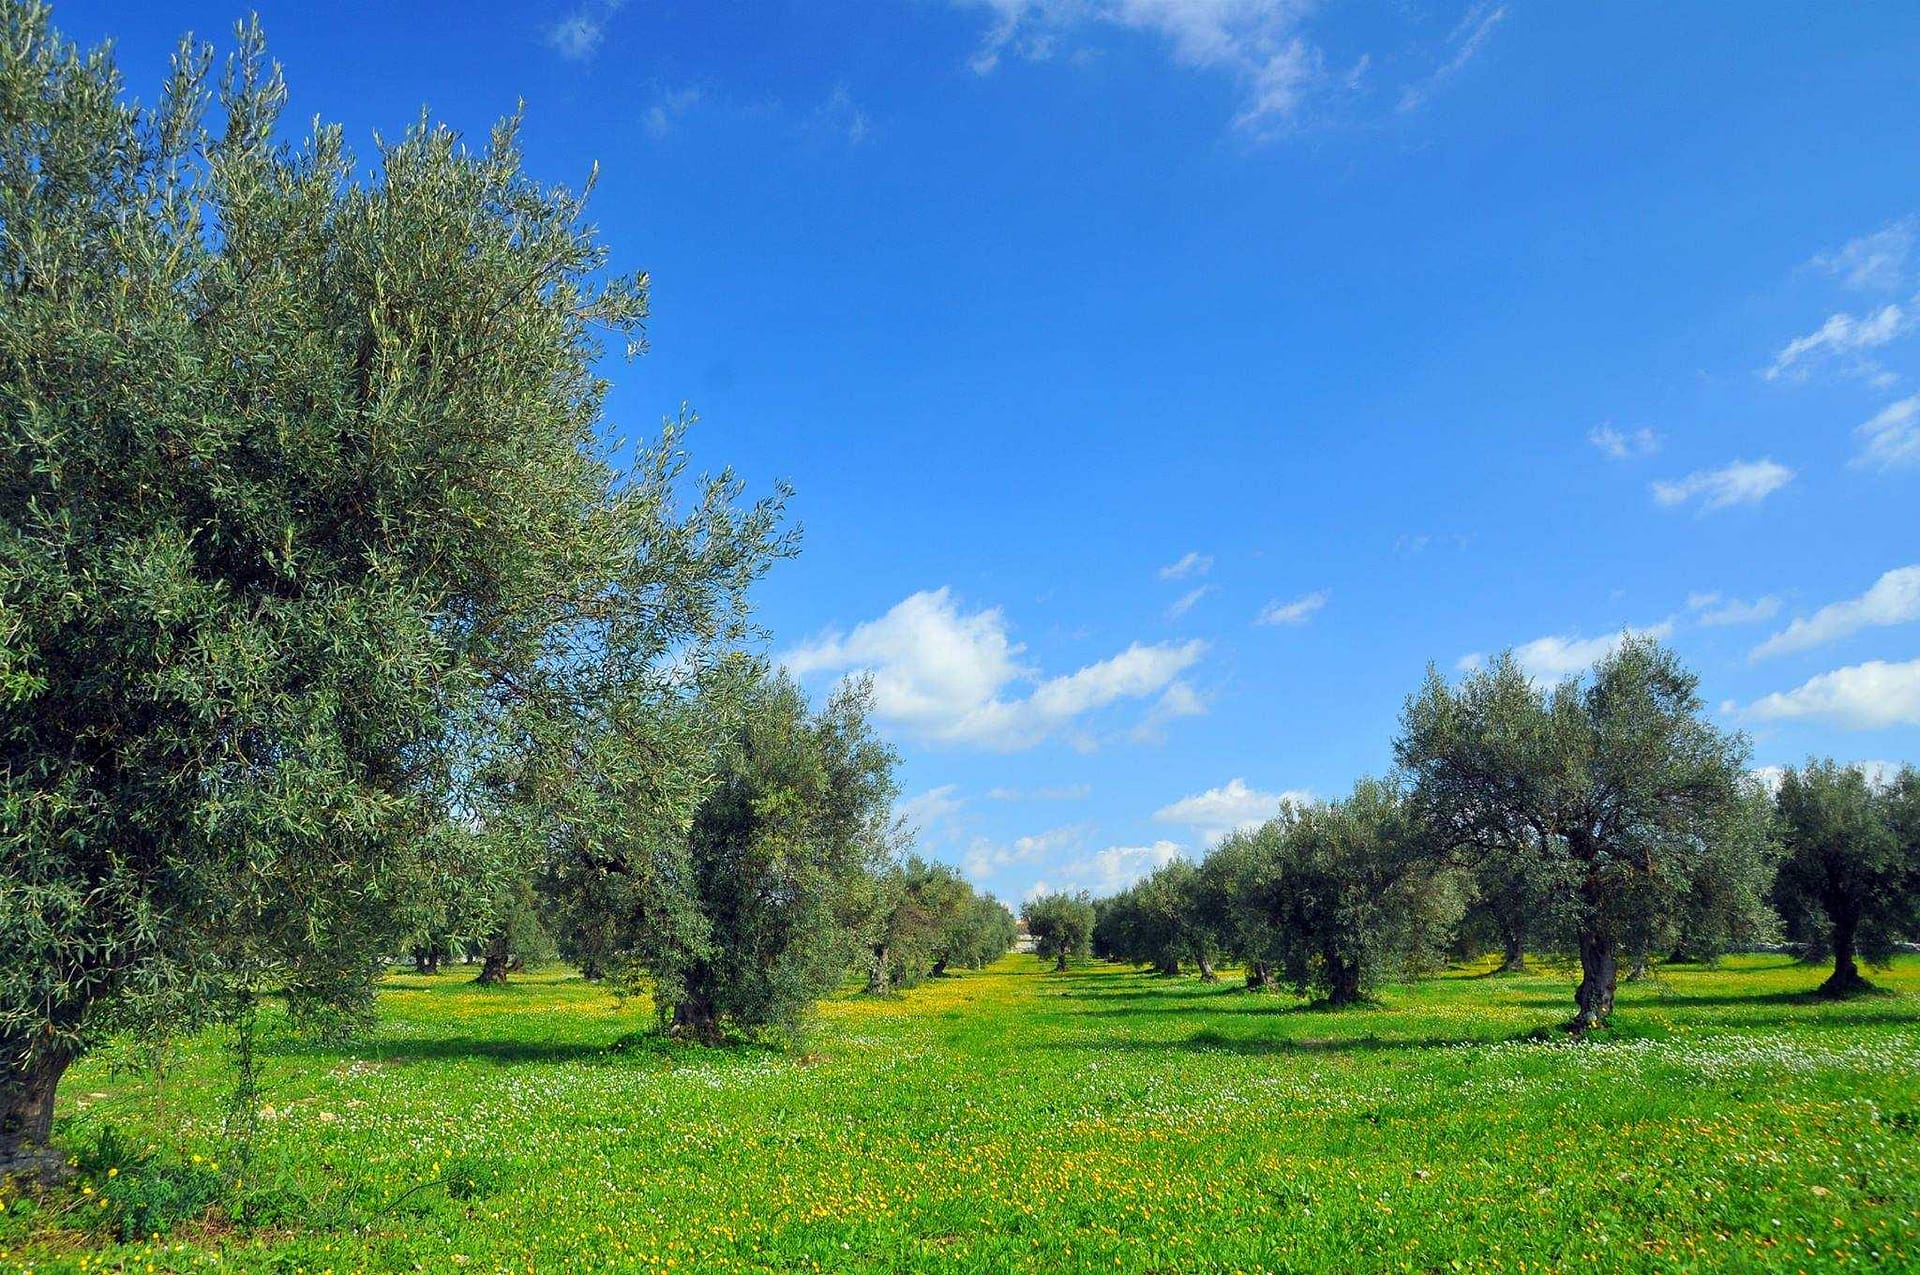 europe-competitions-the-best-olive-oils-organic-producers-from-puglia-triumph-at-world-competition-olive-oil-times